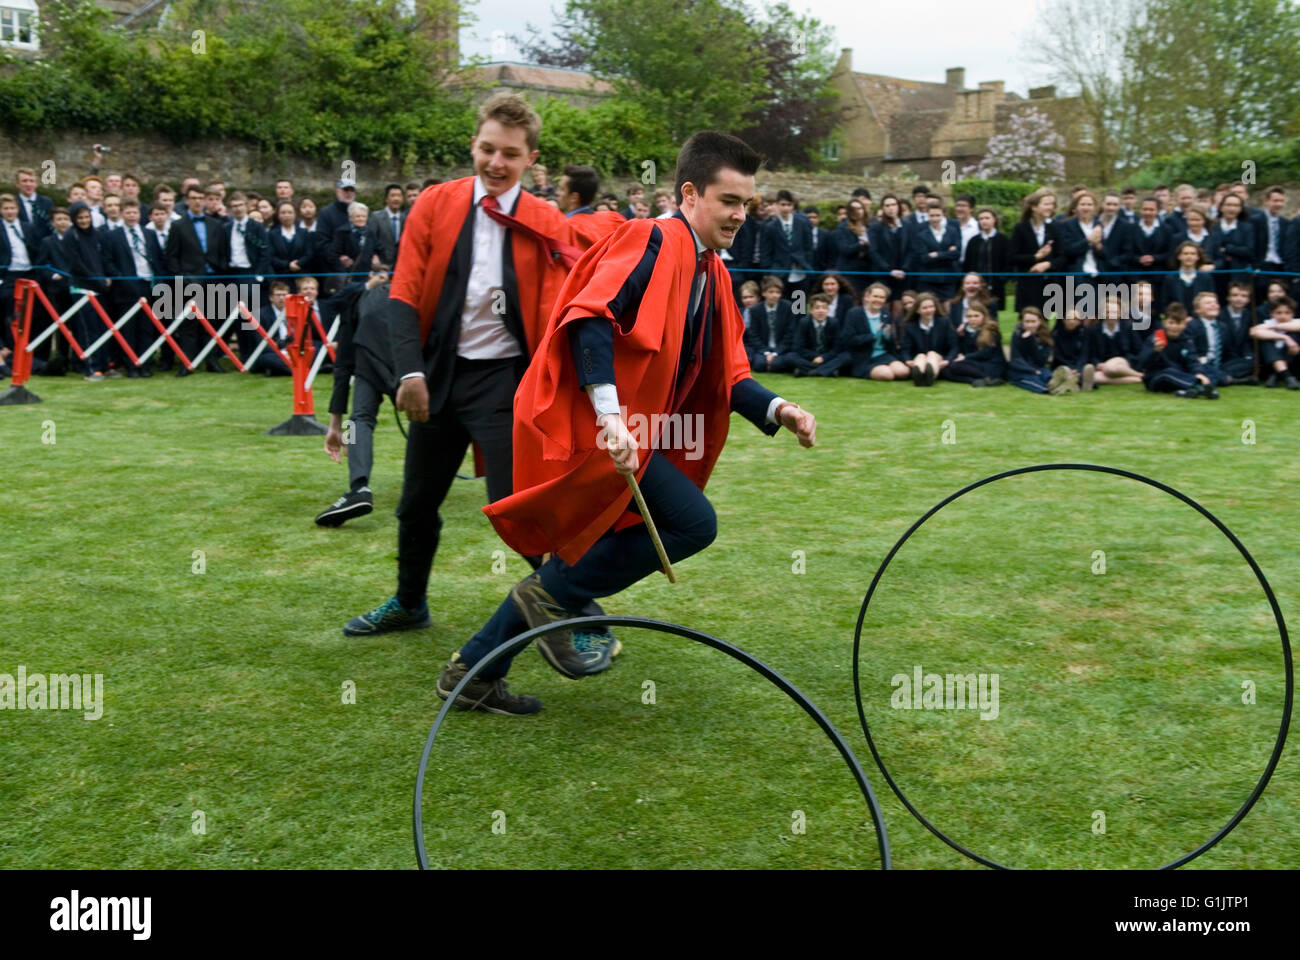 Öffentliche Schulen Traditional Hoop Trundle. Die Kings School Ely. Ely Cathedral Grounds Private Education EnglandUK 2016 2010er Jahre HOMER SYKES Stockfoto